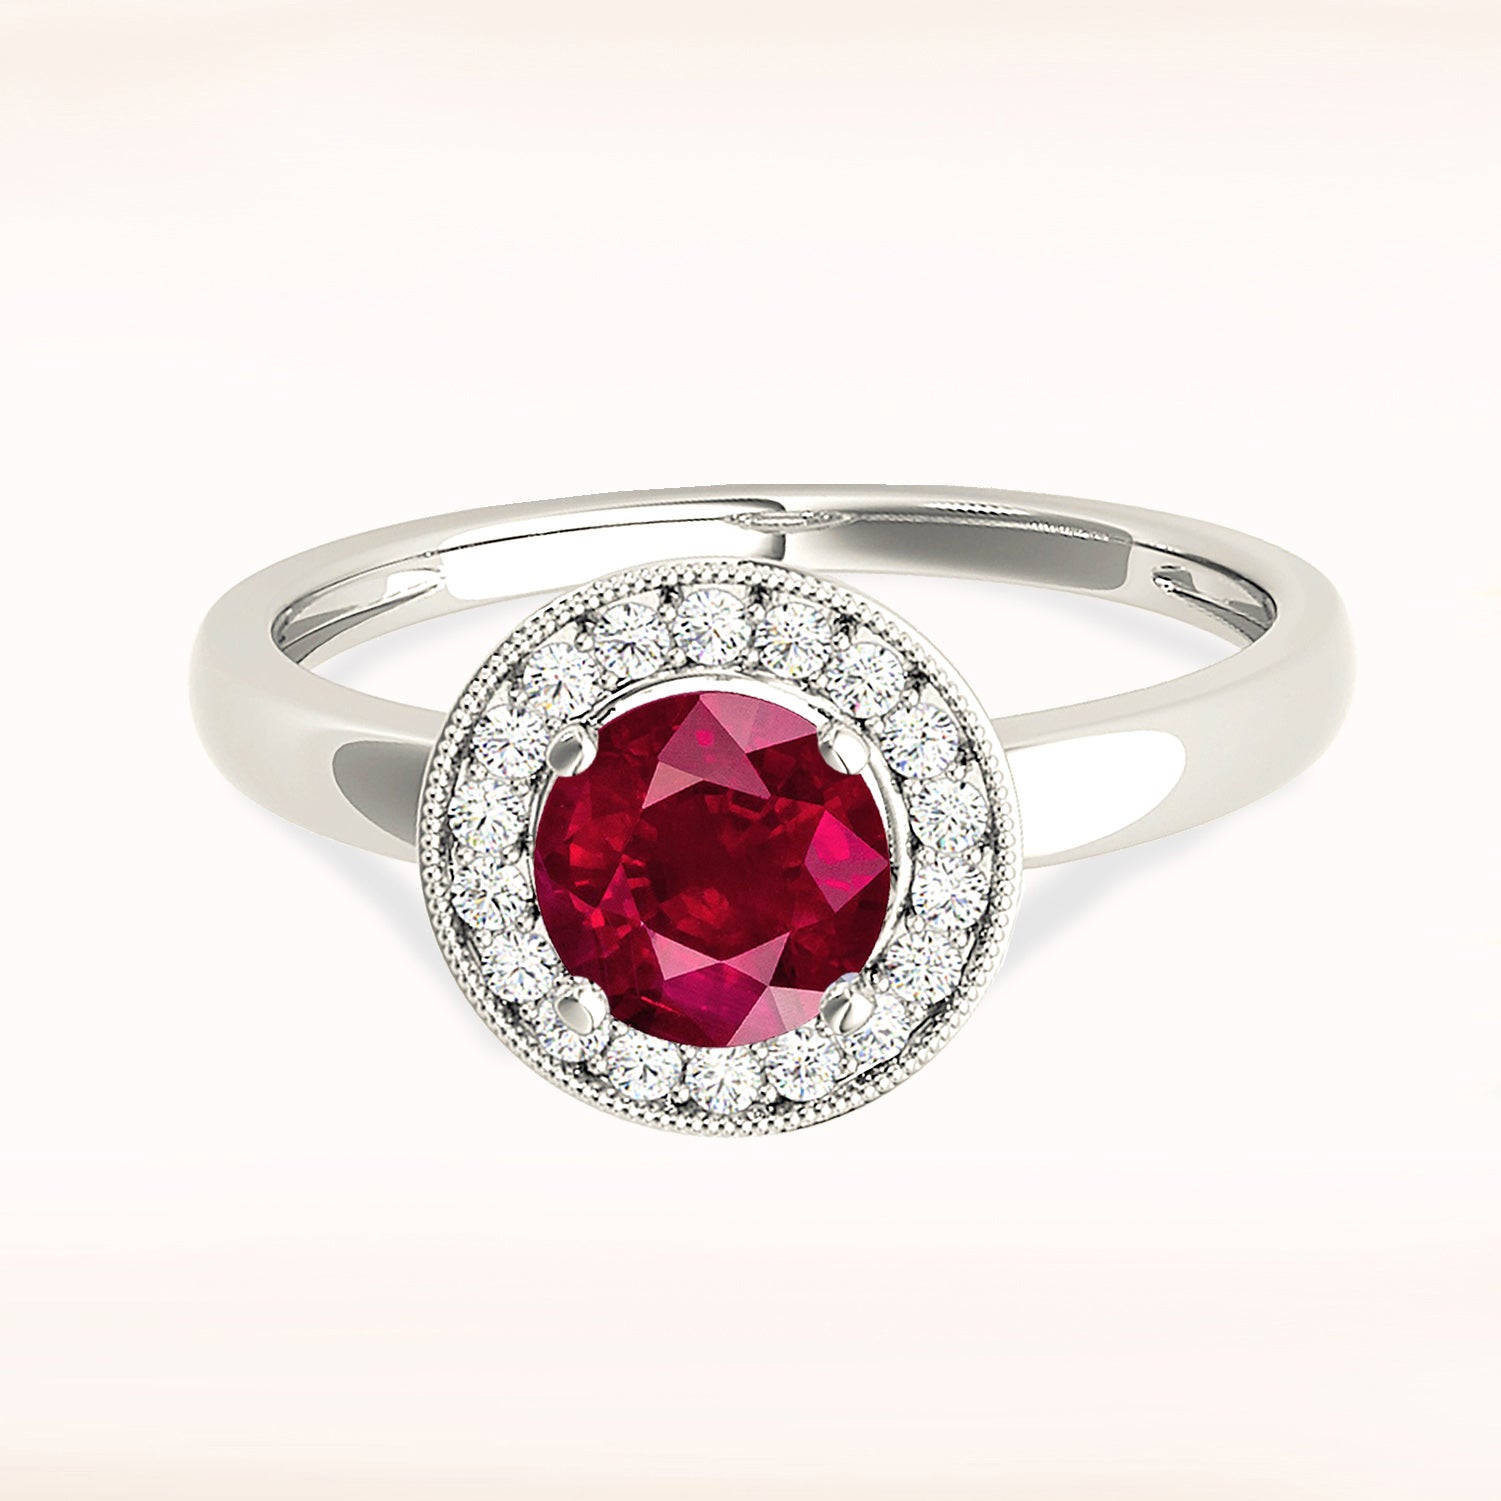 1.35 ct. Genuine Ruby Ring With 0.20 ctw. Diamond Milgrain Halo And Solid gold Plain Band-in 14K/18K White, Yellow, Rose Gold and Platinum - Christmas Jewelry Gift -VIRABYANI